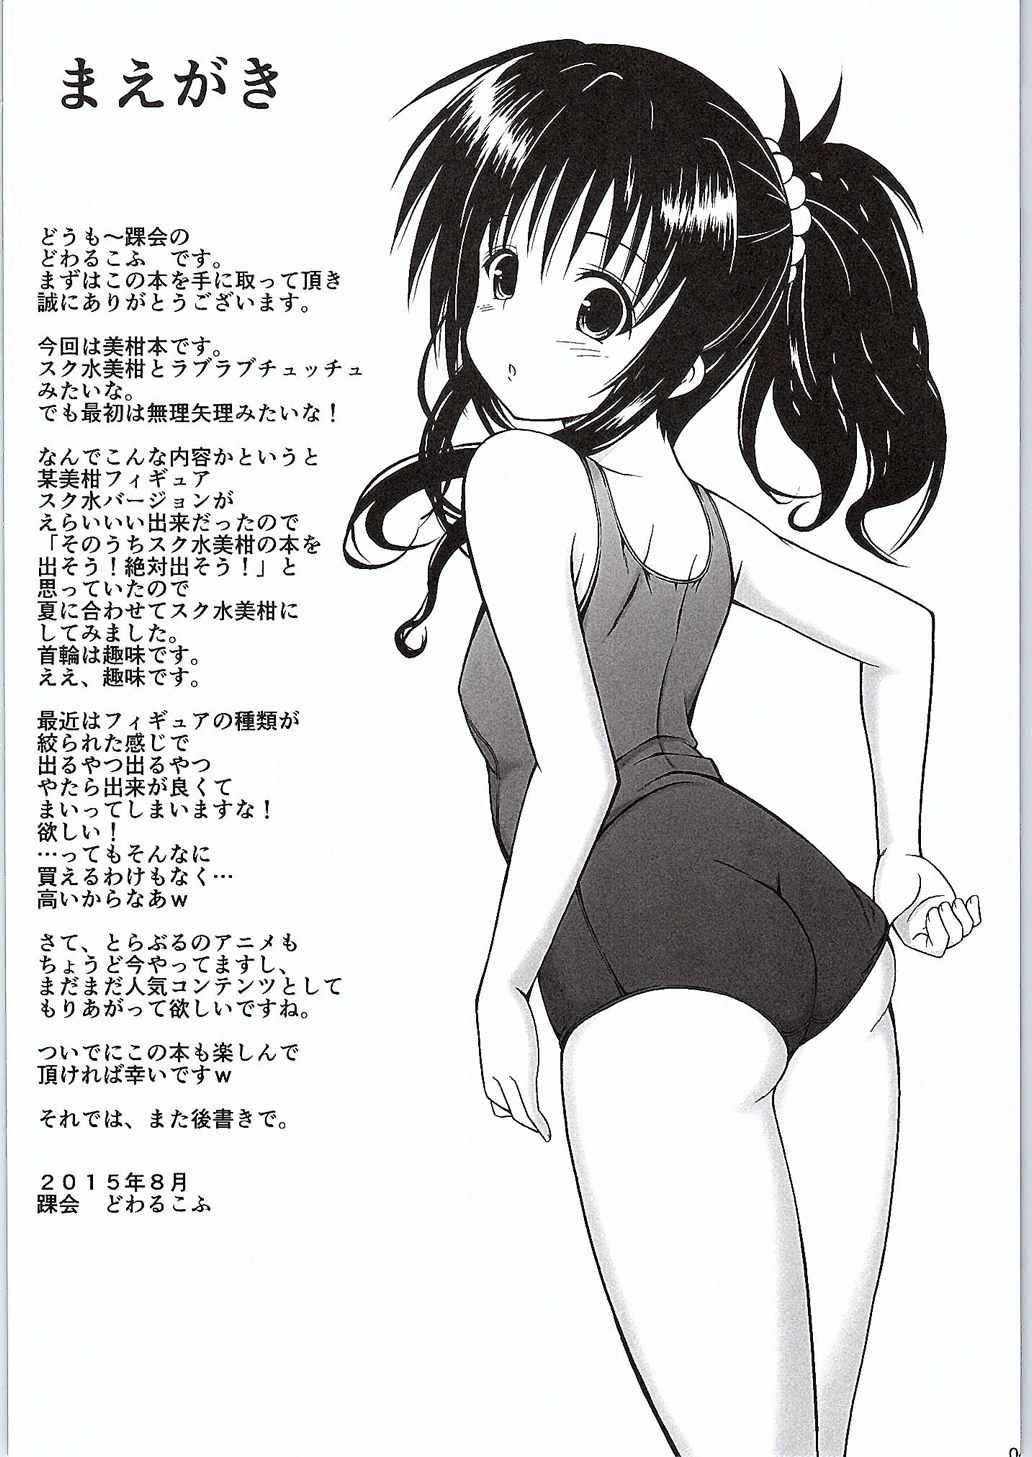 Short Onii-chan to Issho - To love ru Sexcams - Page 3